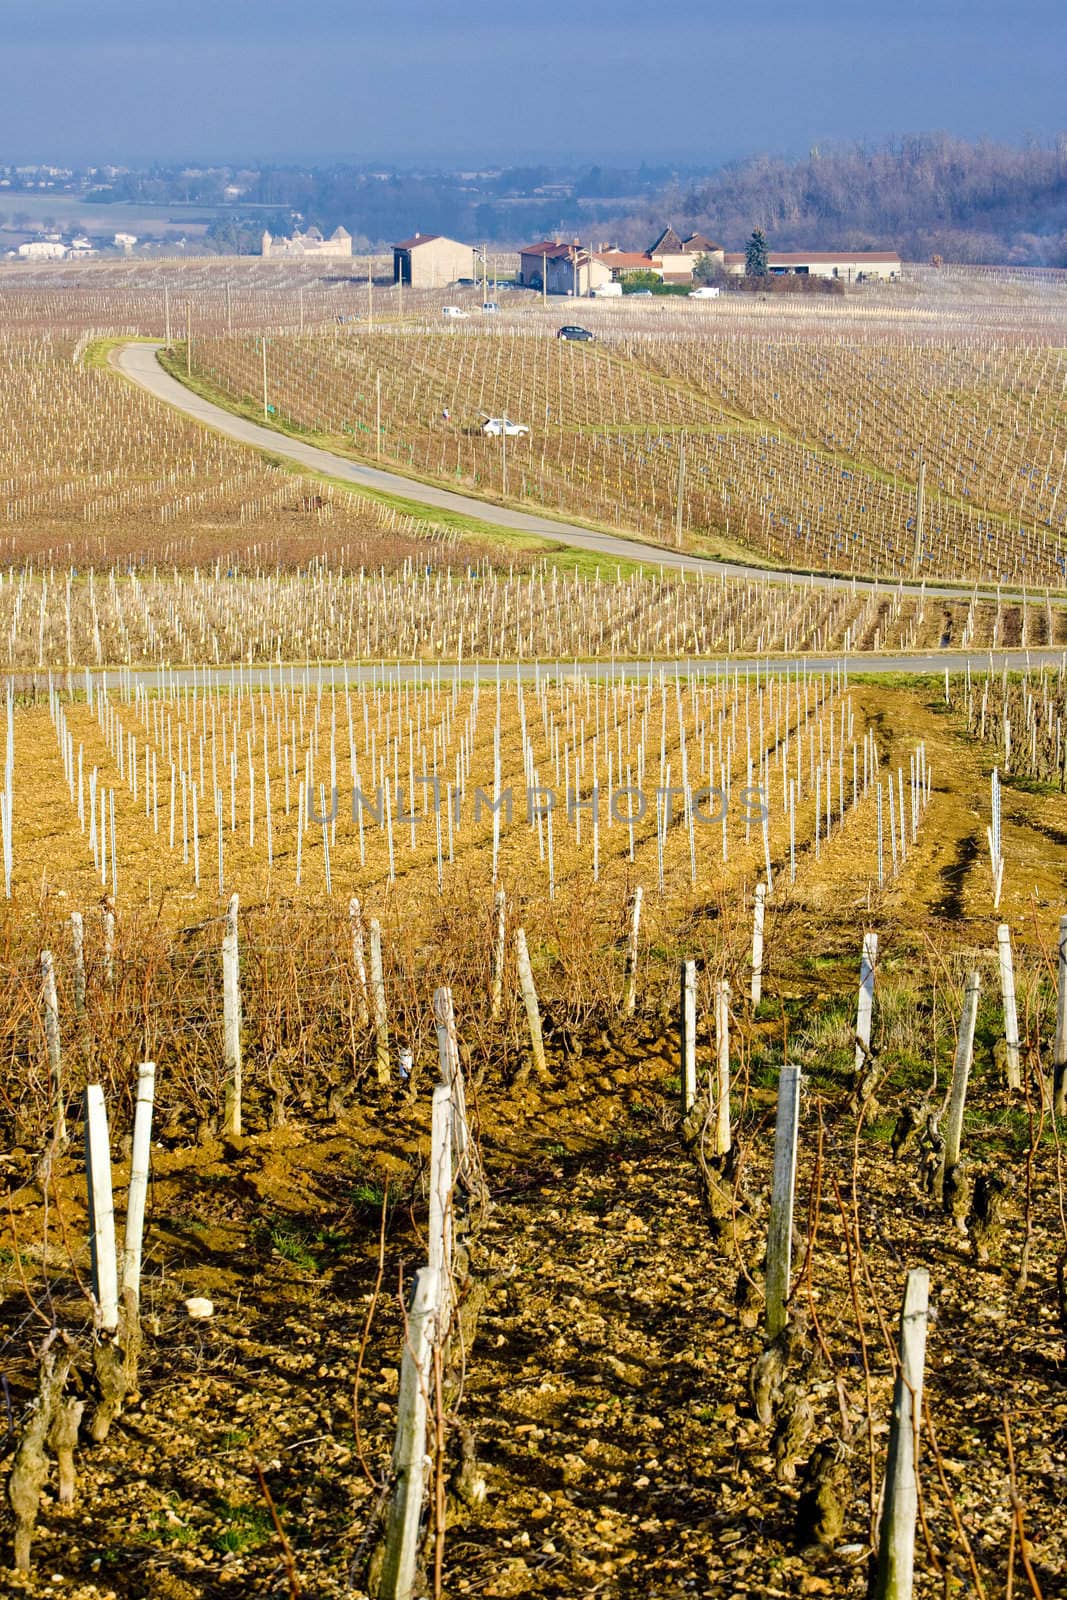 vineyards of Pouilly-Fuiss� region, Burgundy, France by phbcz